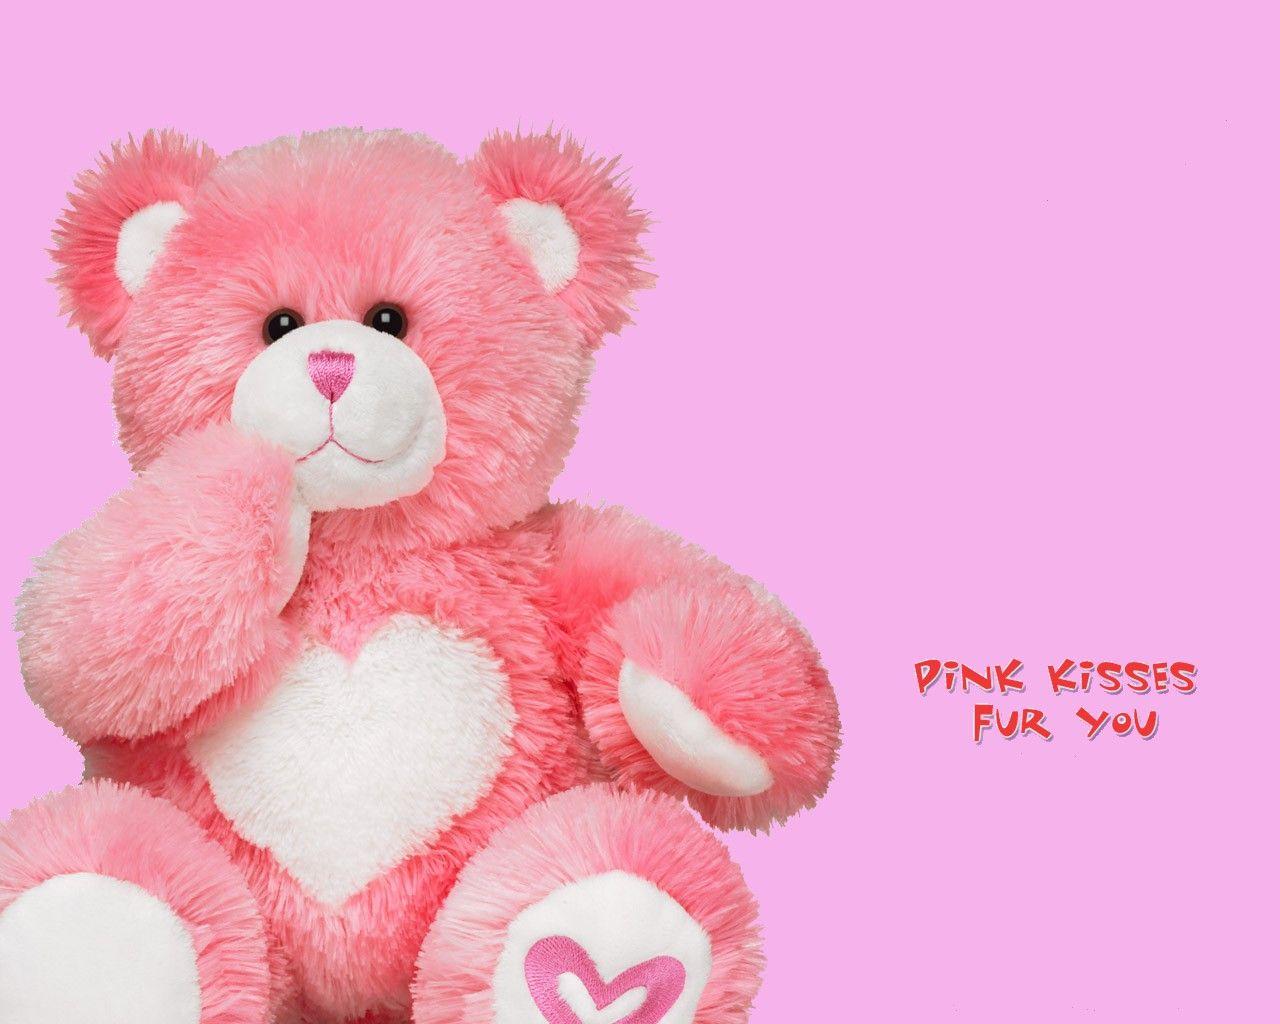 Download Free 100 Lovely Teddy Bear Wallpaper Image. The Quotes Land